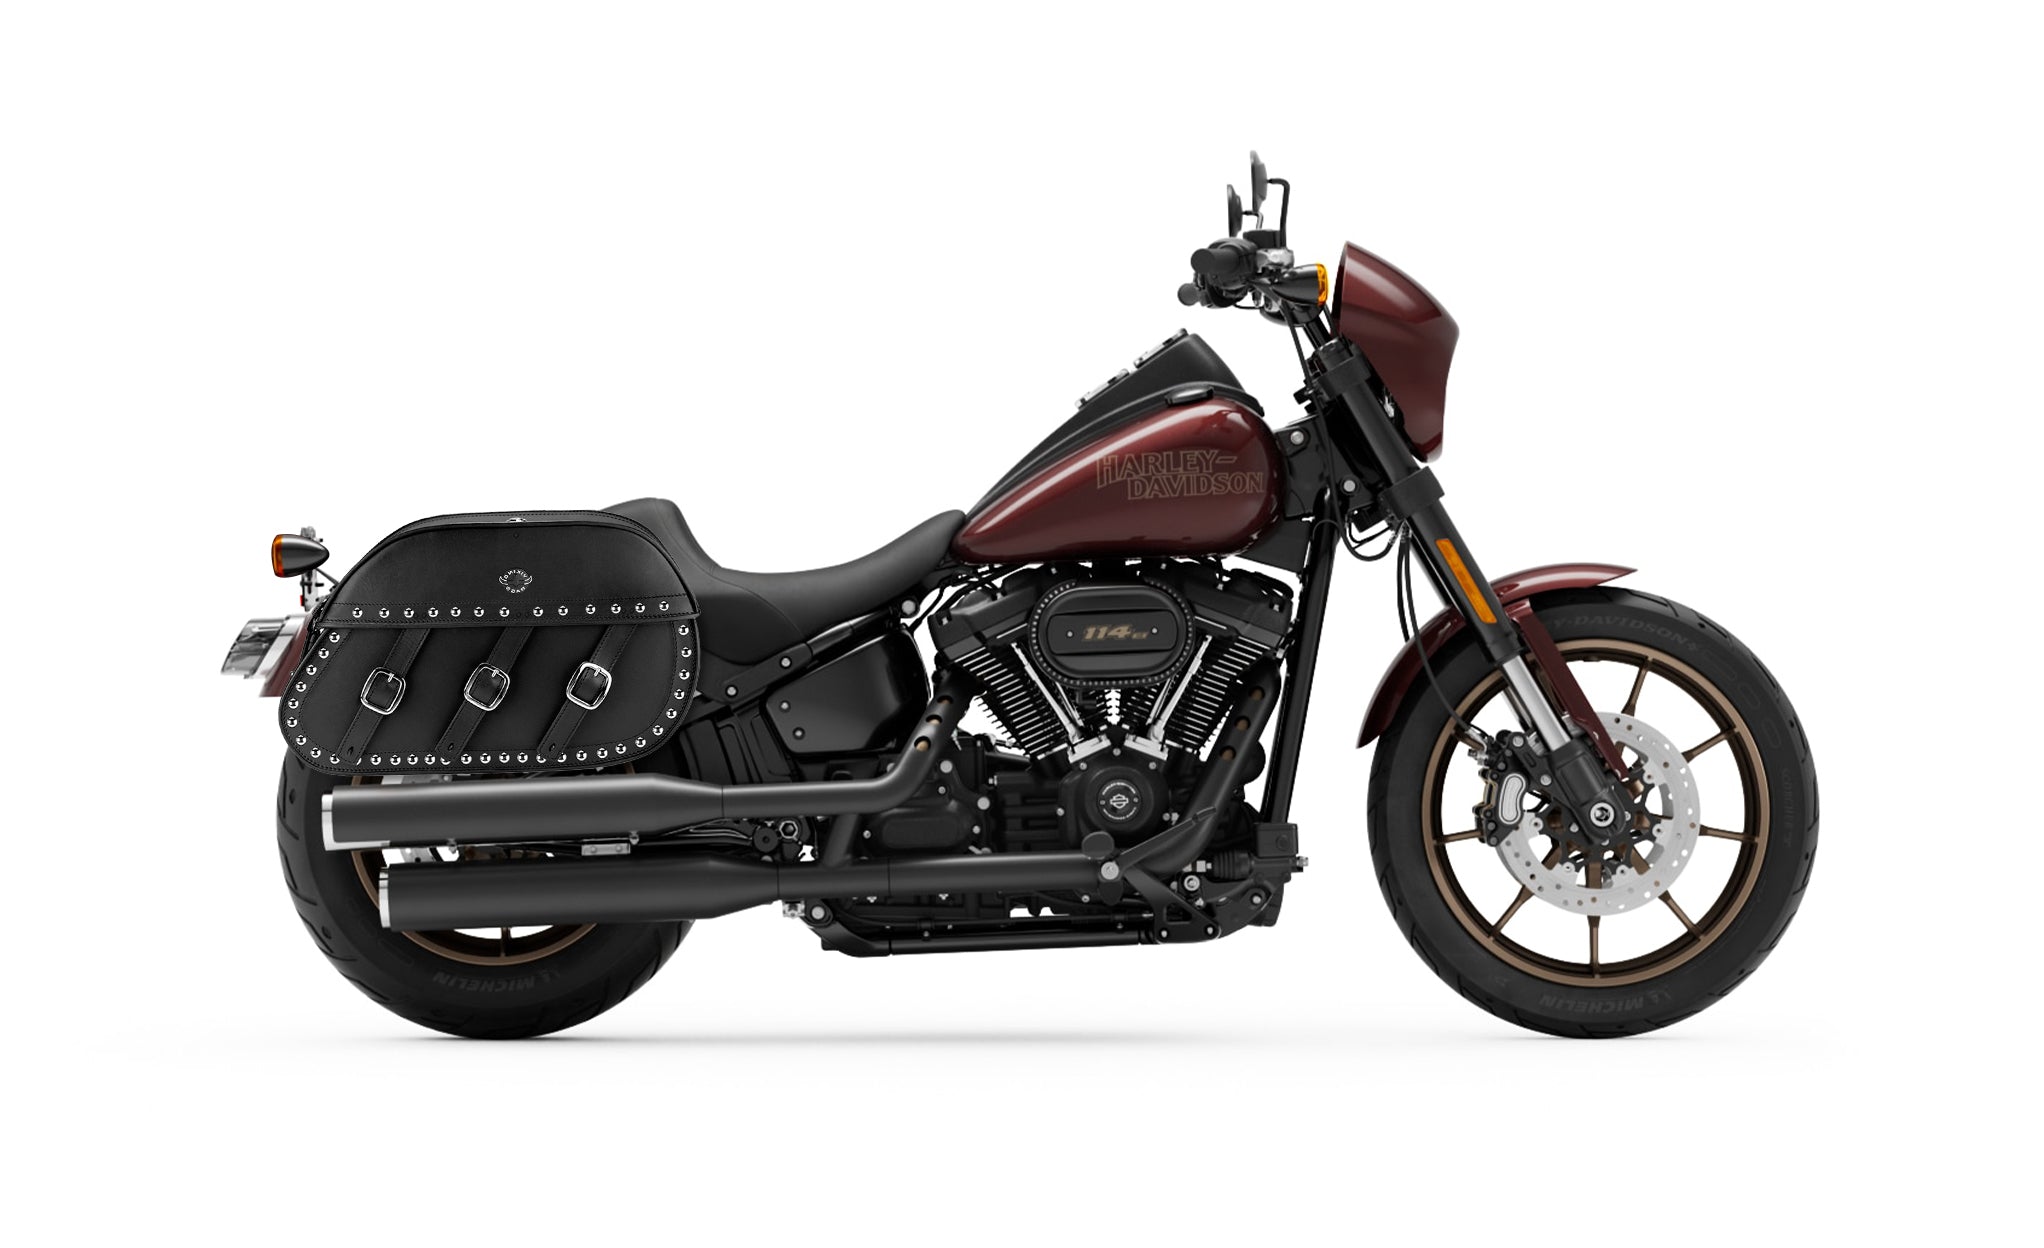 34L - Trianon Extra Large Studded Leather Motorcycle Saddlebags for Harley Softail Low Rider S FXLRS on Bike Photo @expand